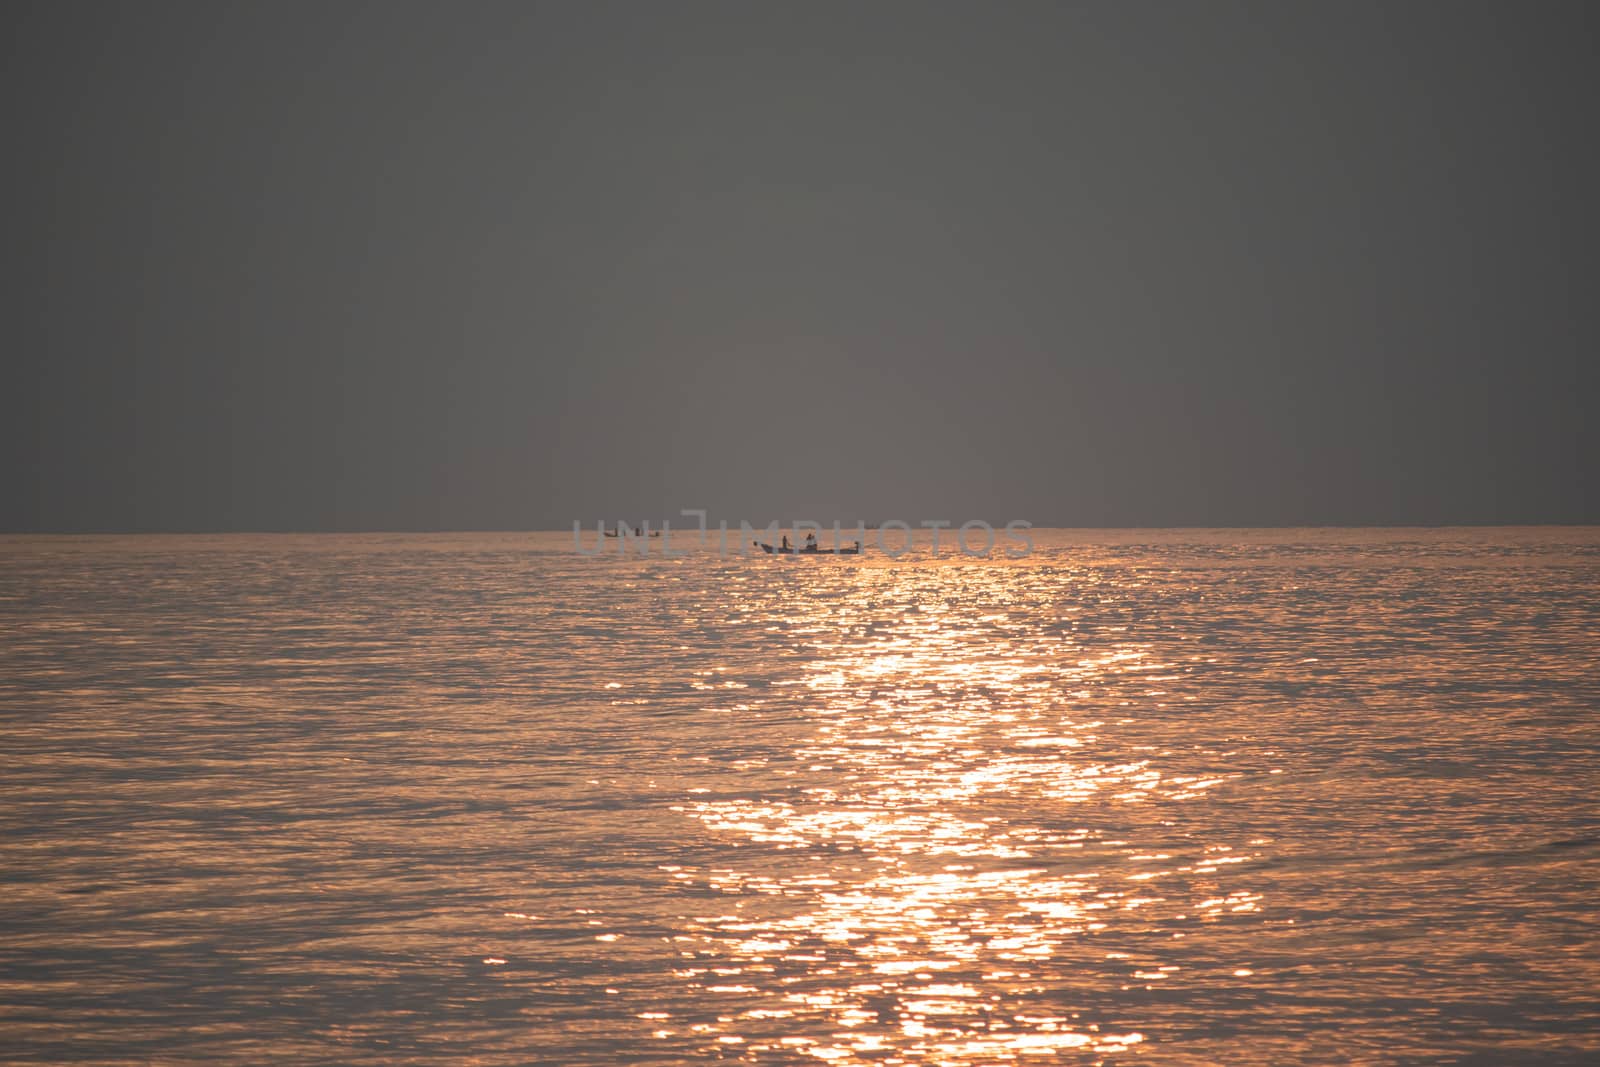 The sun's rays appear transparent in the sea water.Sunrise in the morning from the clouds at Kovalam beach in Chennai